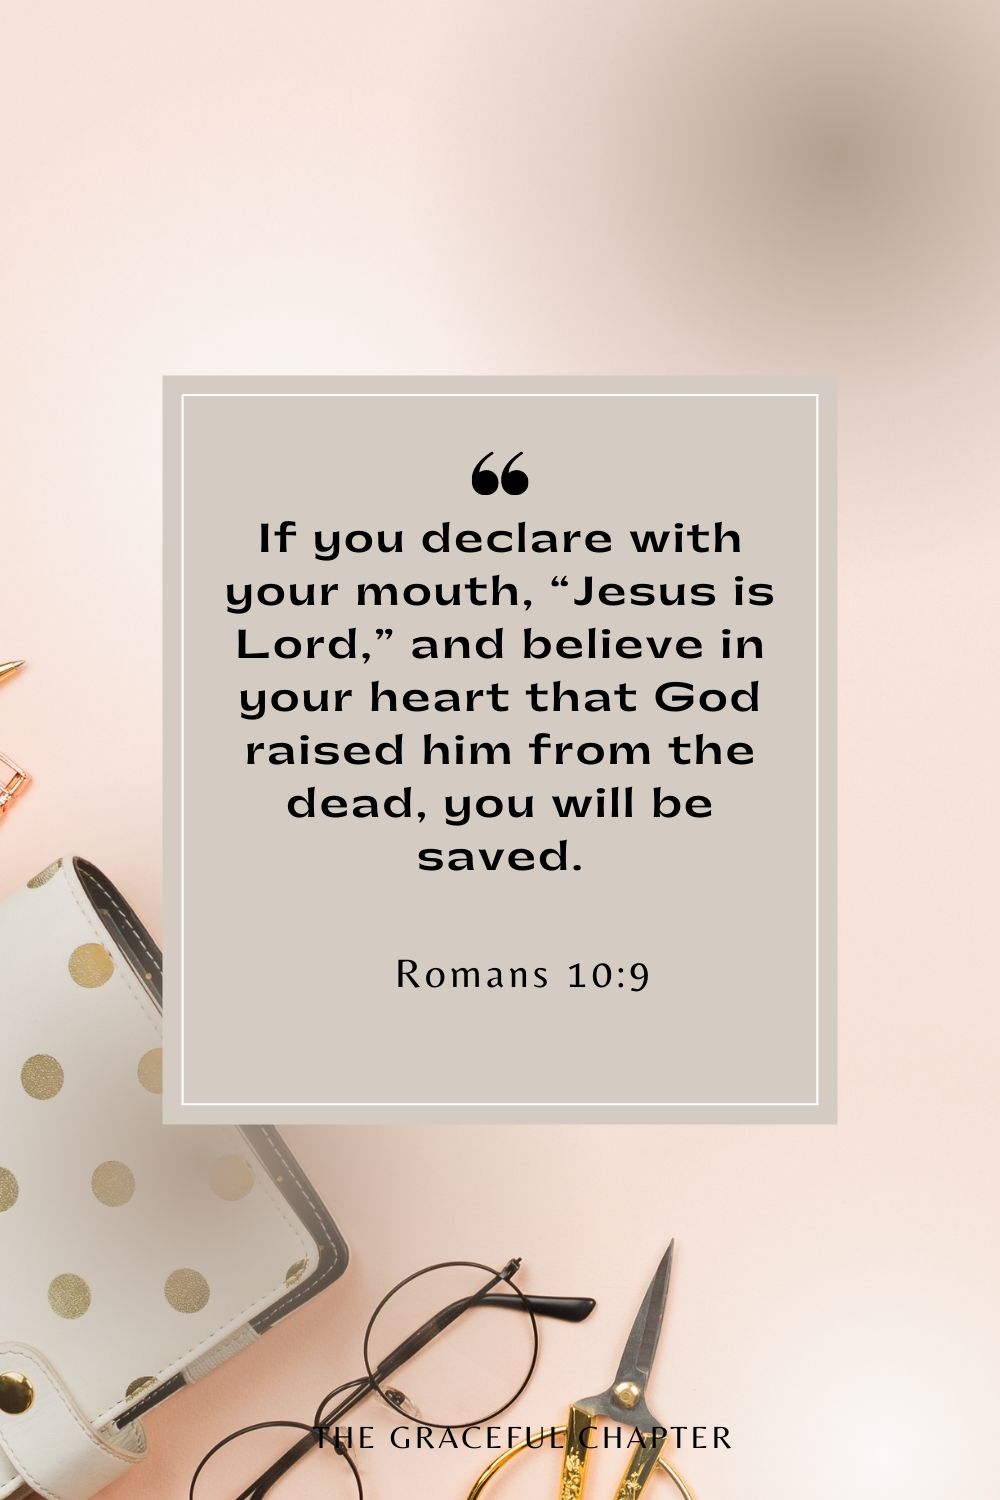 If you declare with your mouth, “Jesus is Lord,” and believe in your heart that God raised him from the dead, you will be saved. If you declare with your mouth, “Jesus is Lord,” and believe in your heart that God raised him from the dead, you will be saved. Romans 10:9